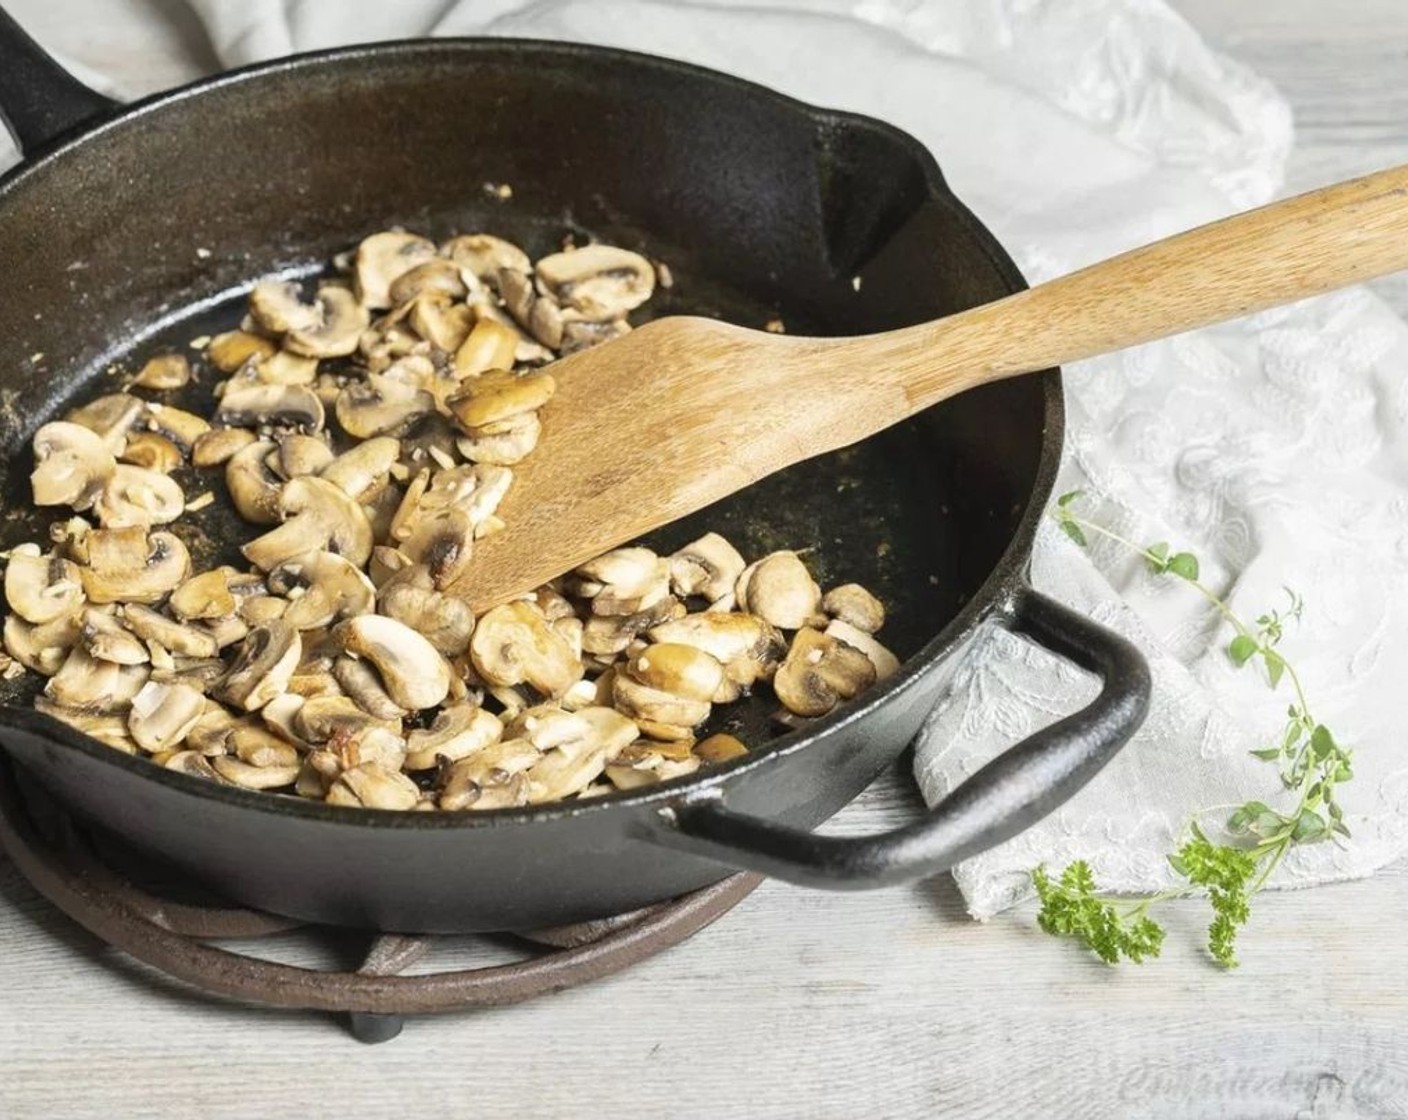 step 3 Using the same skillet, heat the remaining Canola Oil (1/2 Tbsp) until hot over medium-high heat. Add White Mushroom (1 pckg) and allow to cook without stirring until bottoms are golden and moisture is starting to evaporate.